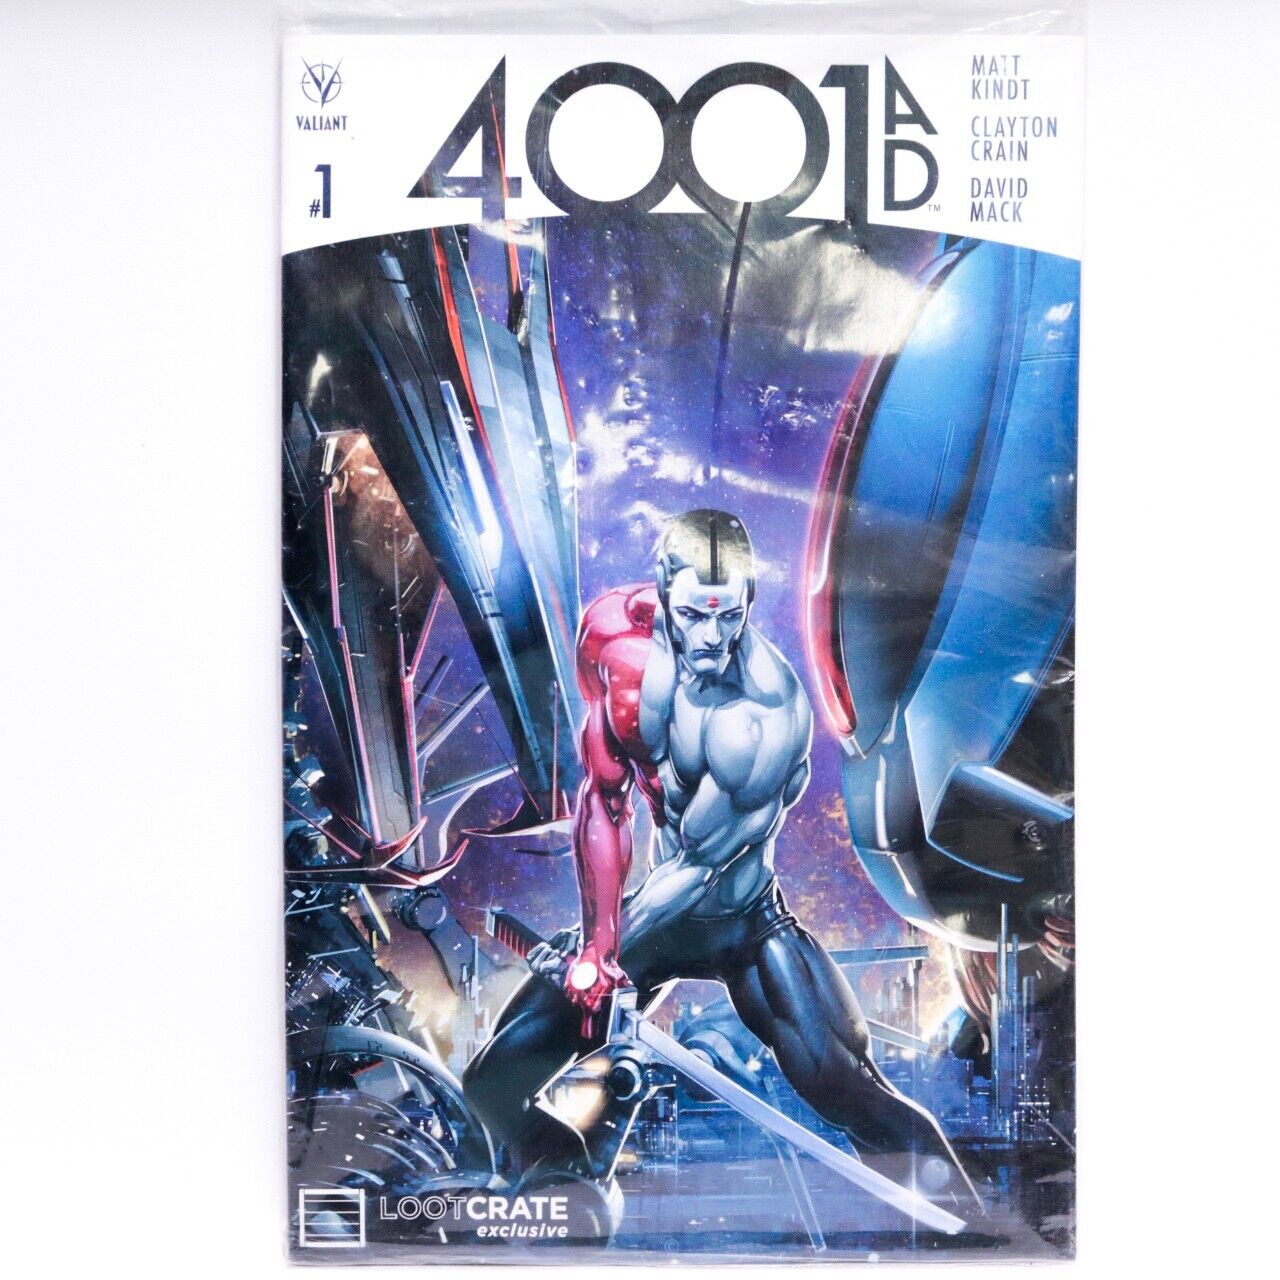 4001 AD Comic Book by Valiant #1 - Loot Crate